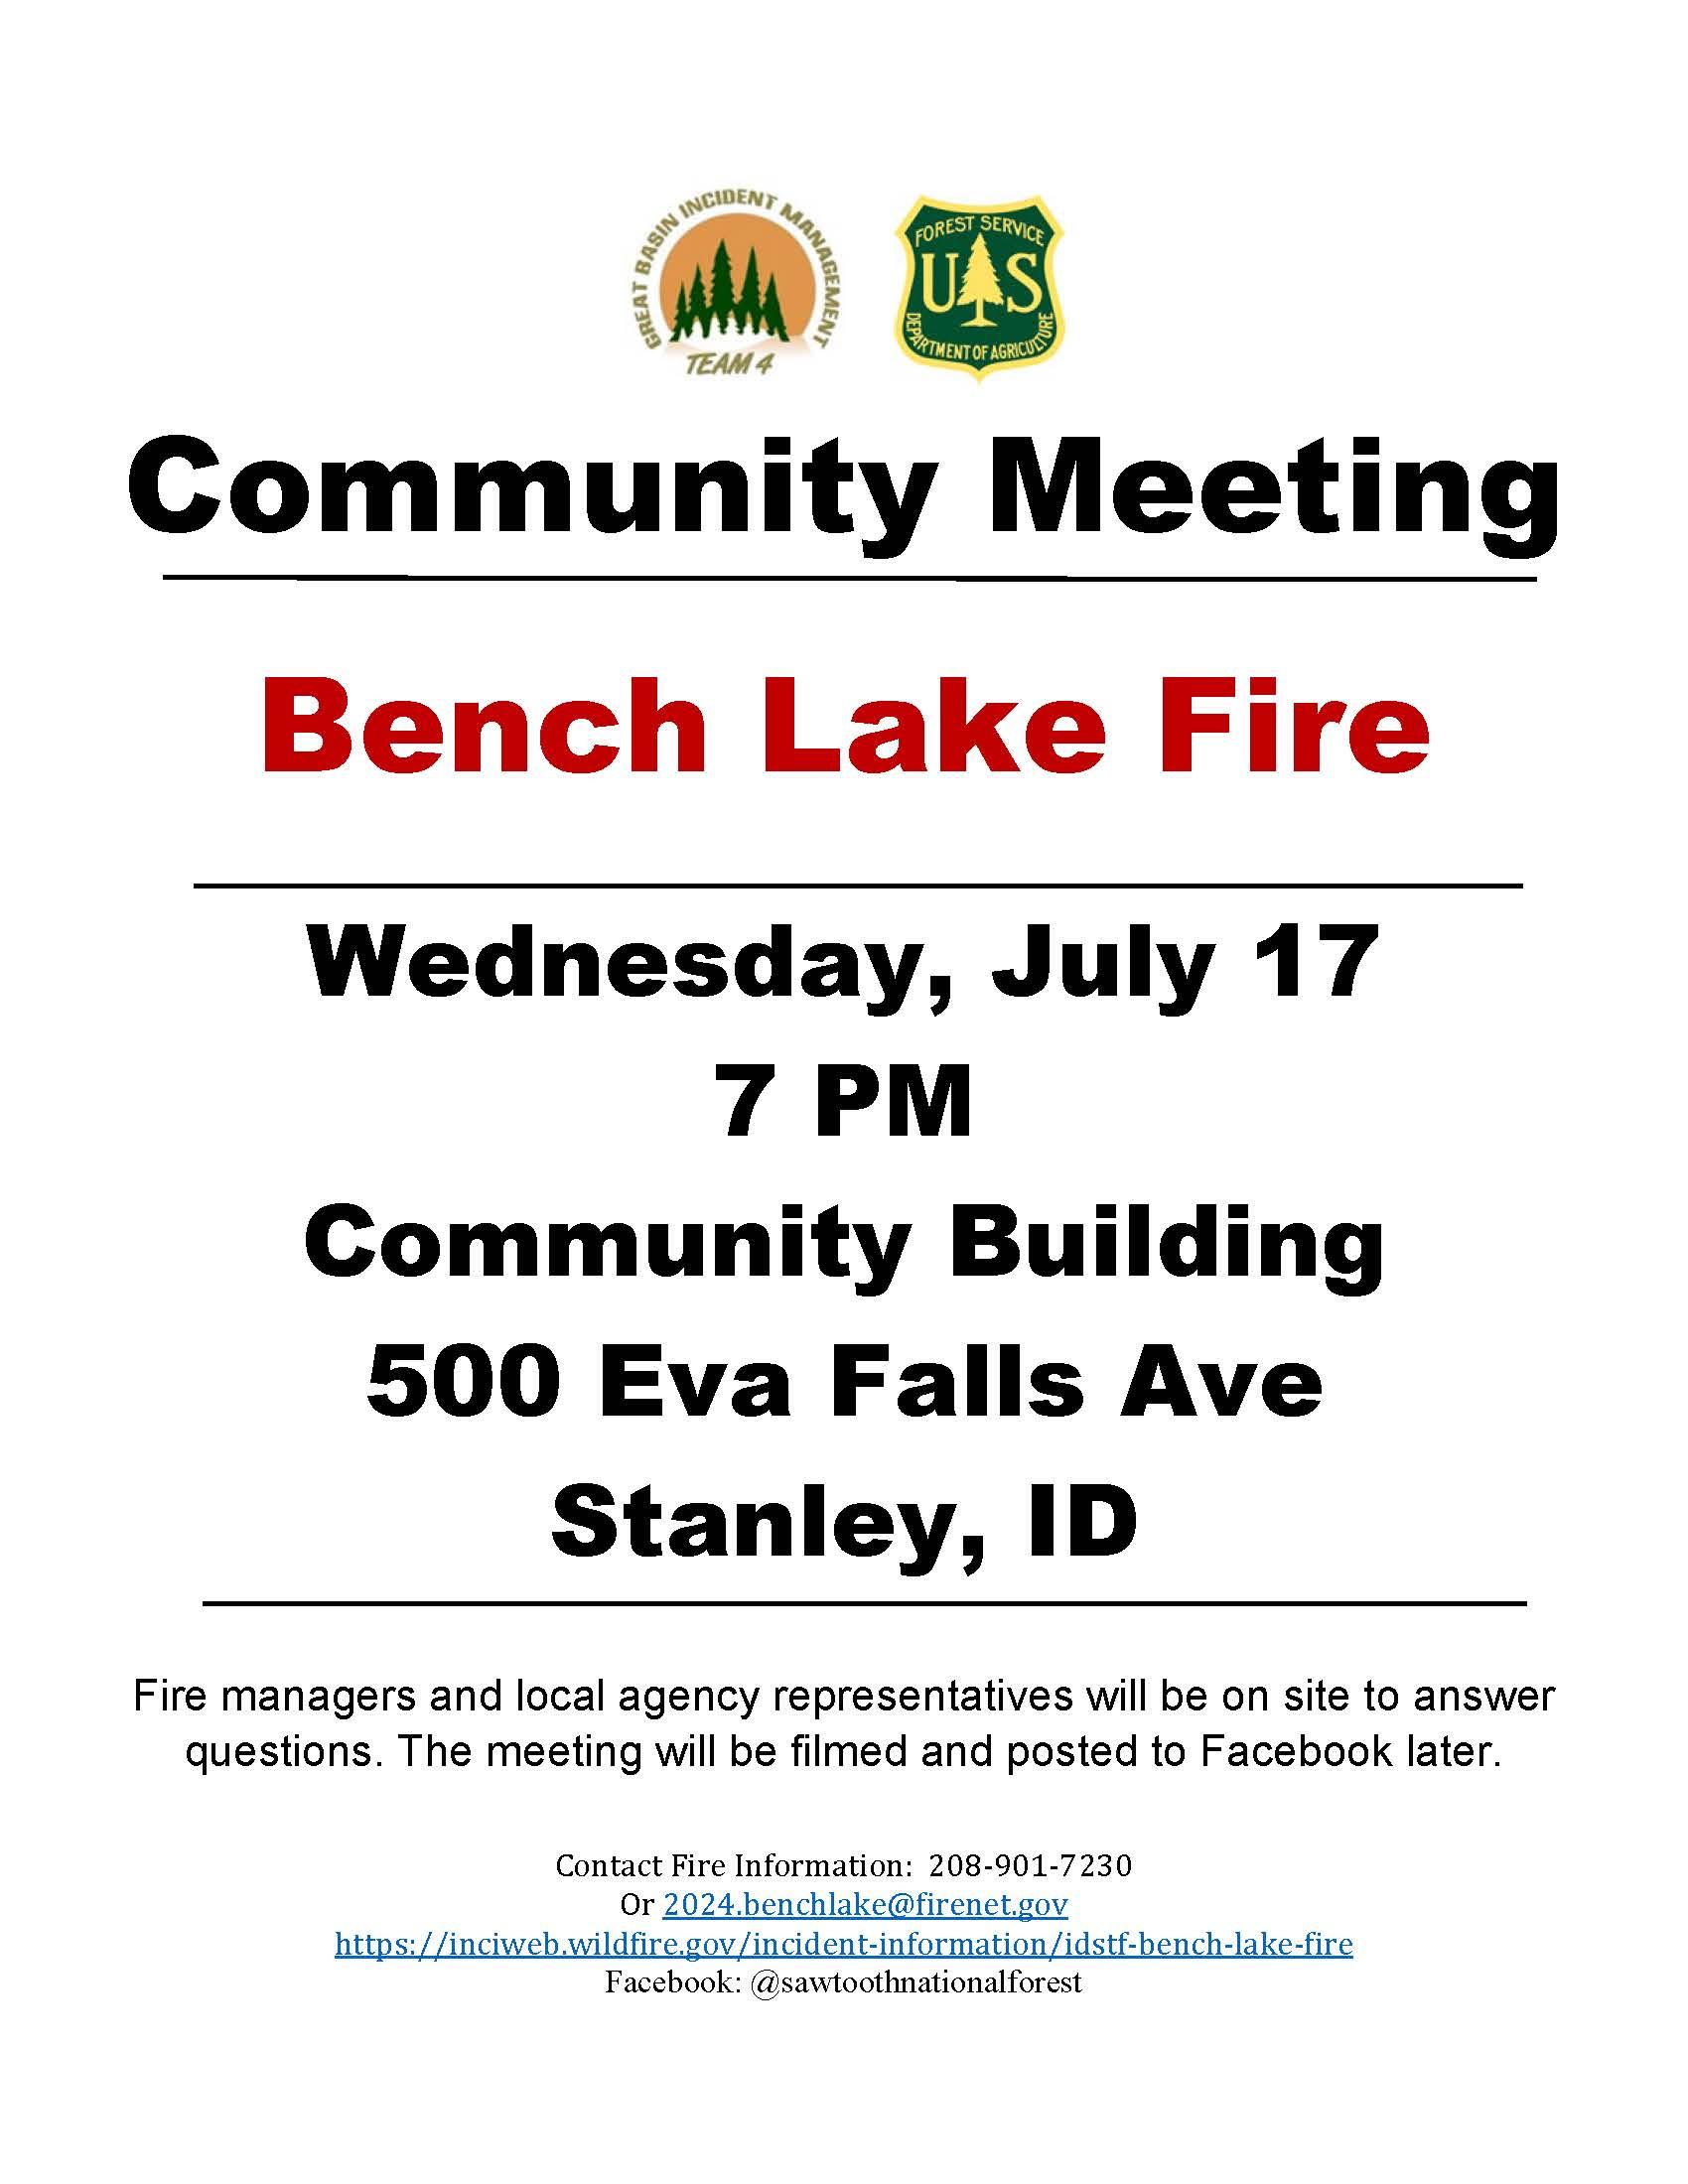 Flyer for Wednesday, July 17 Bench Lake Fire Community Meeting